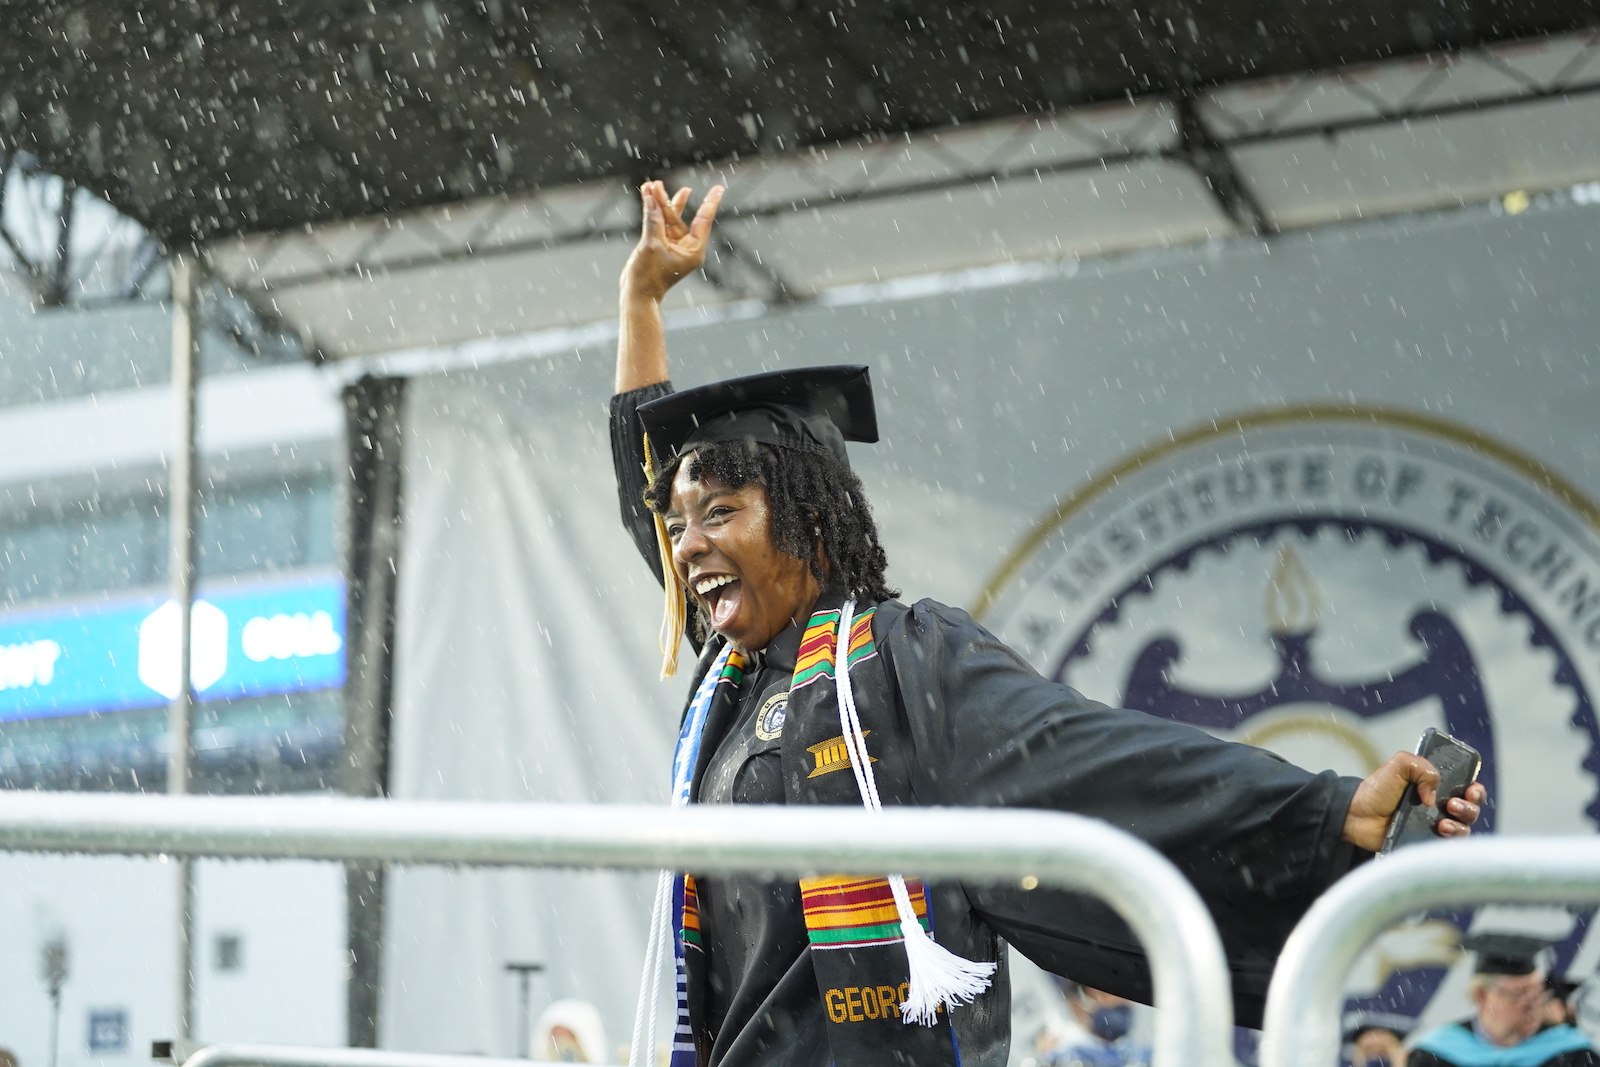 Graduate on stage in the rain. 